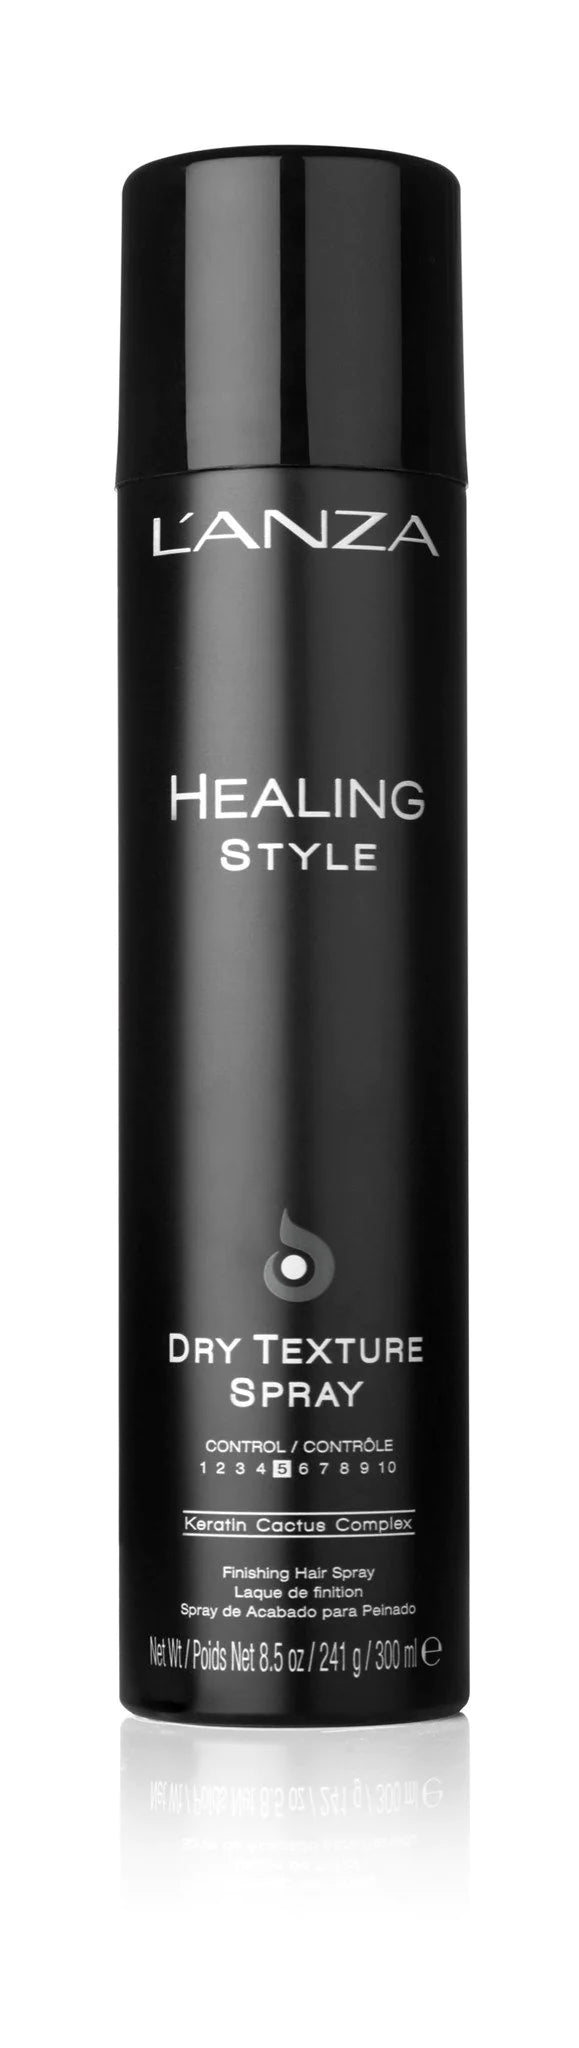 L'ANZA HEALING STYLE DRY TEXTURE SPRAY 300ML